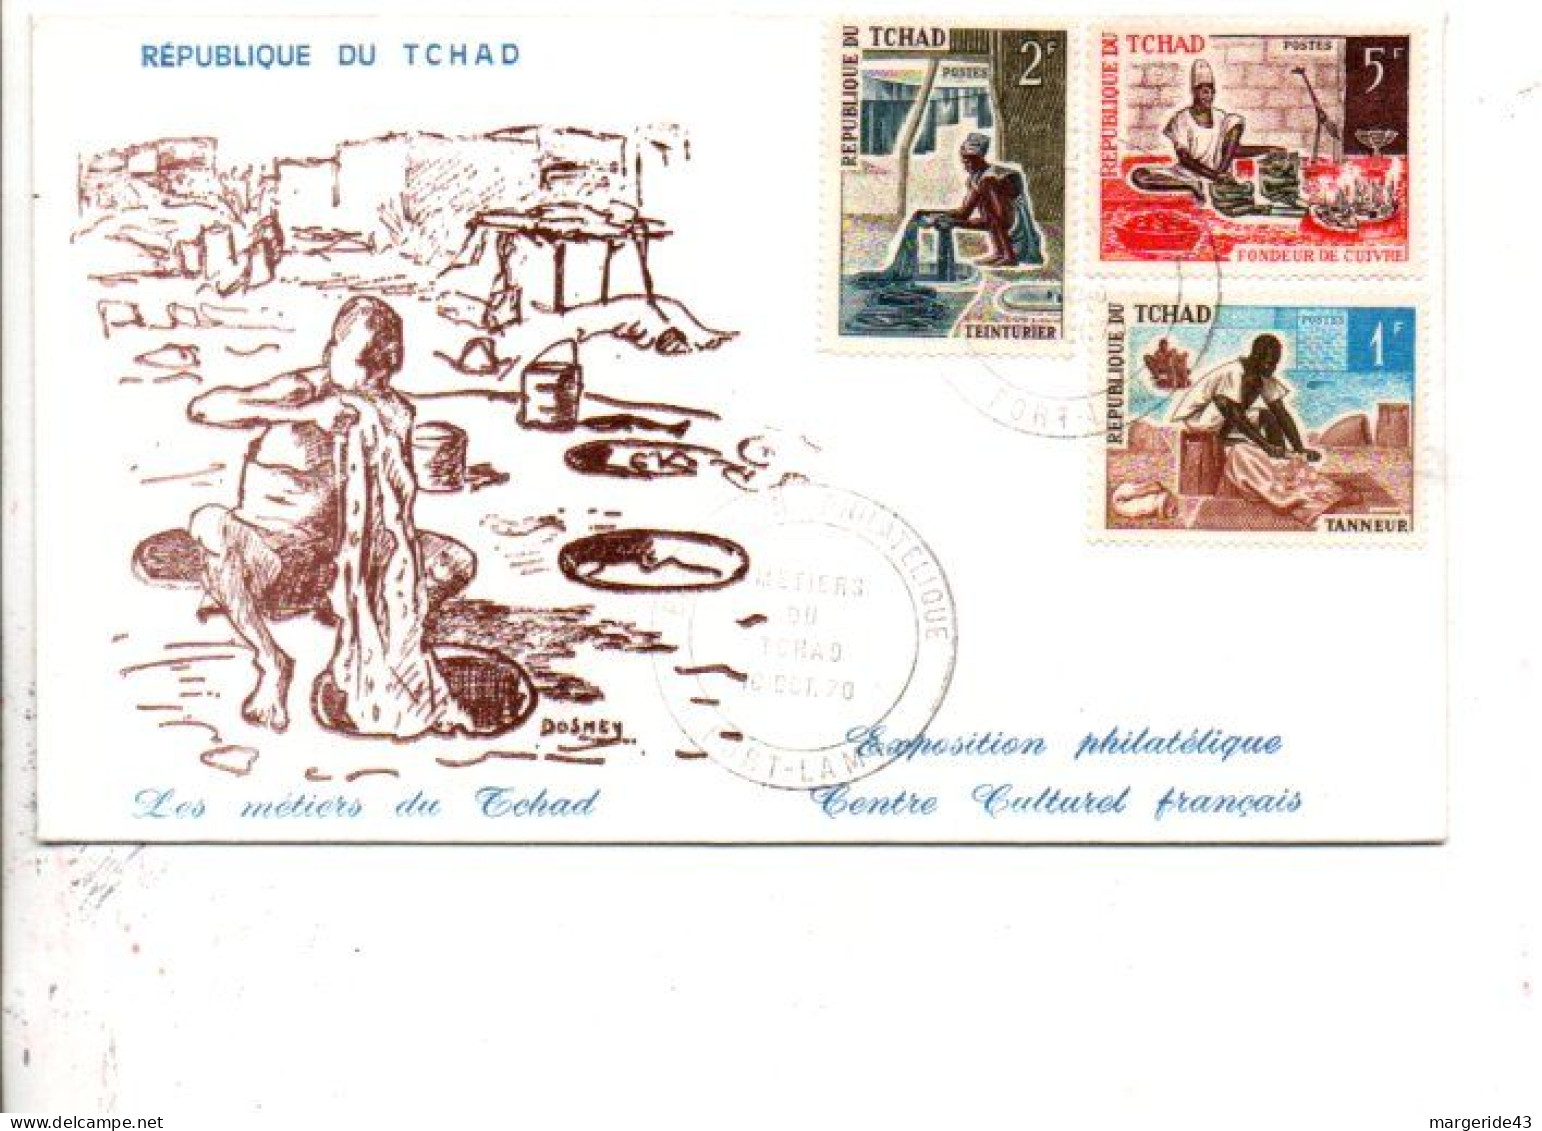 TCHAD FDC 1970 LES METIERS DU RCHAD - Tschad (1960-...)